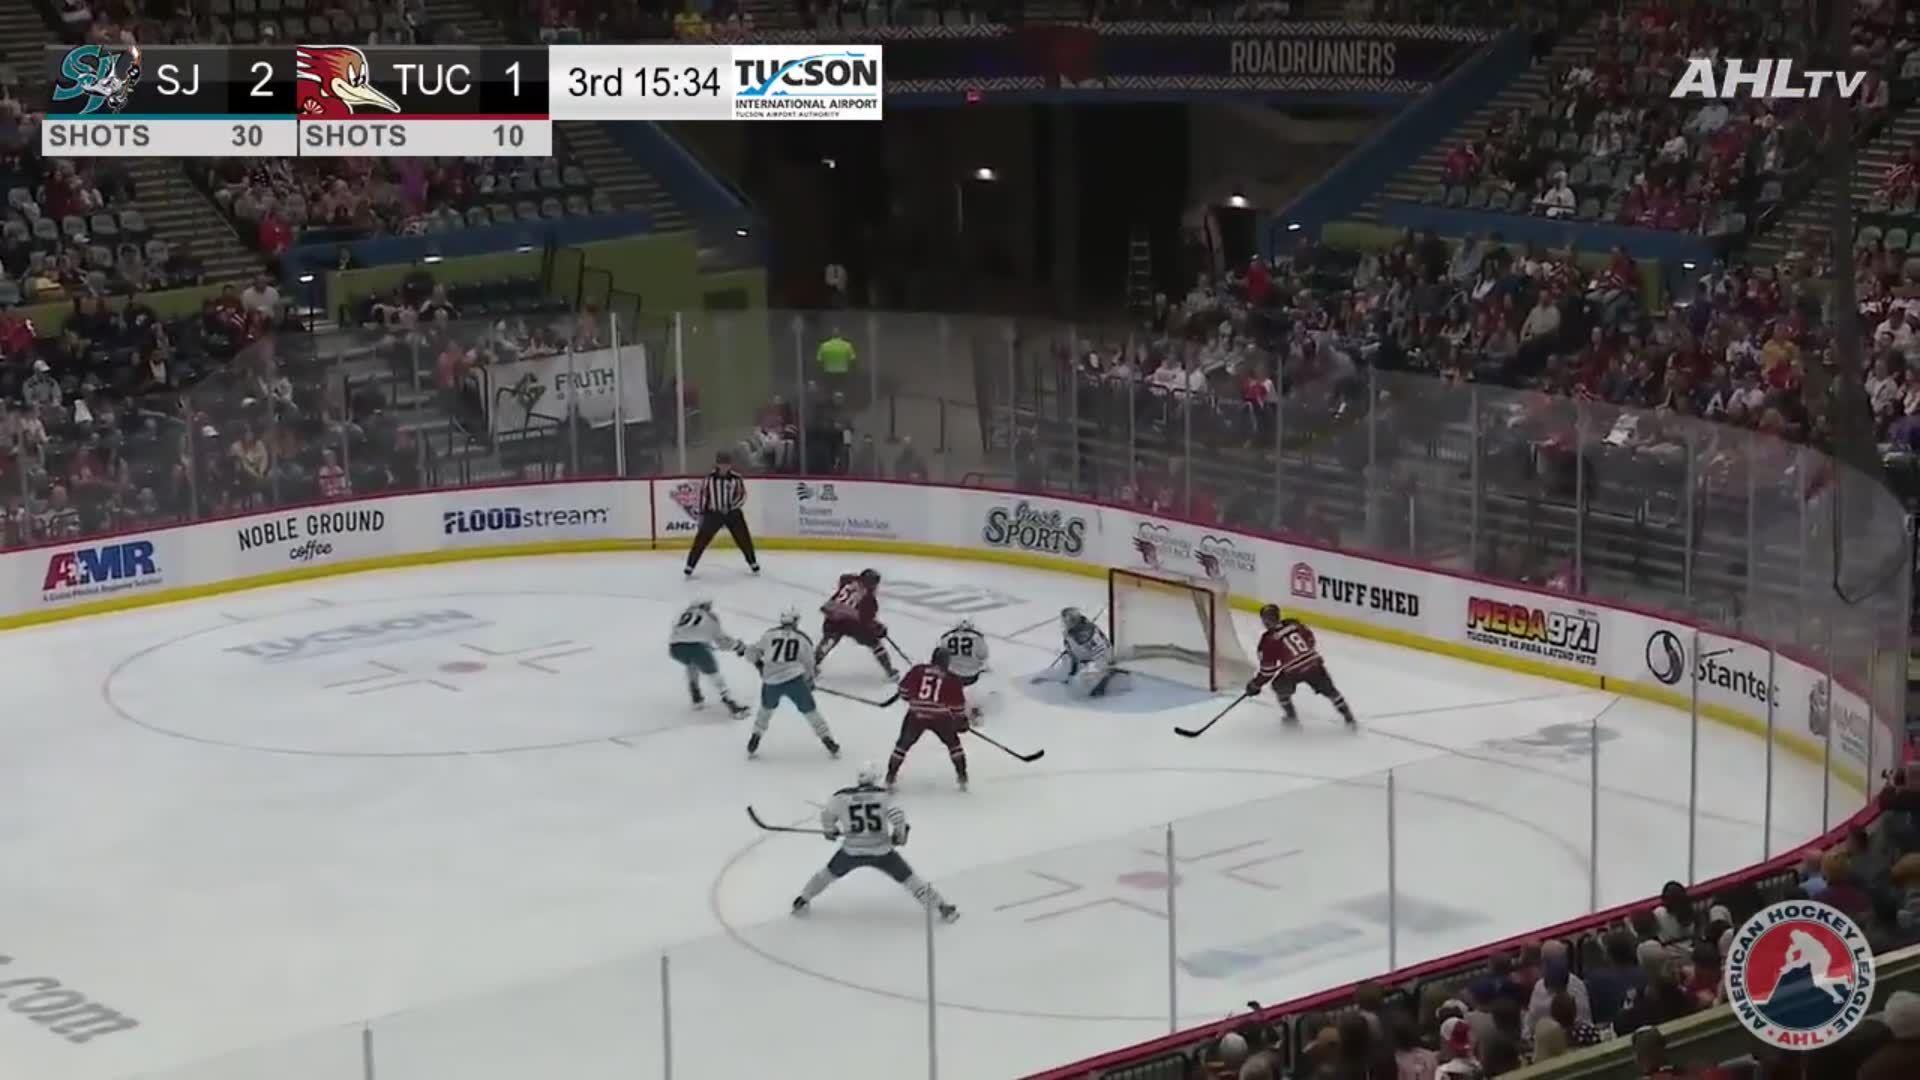 Semi-Pro Hockey in Finland: Rink Tour & Epic Retro Game vs. YJK, Behind-The-Scenes!